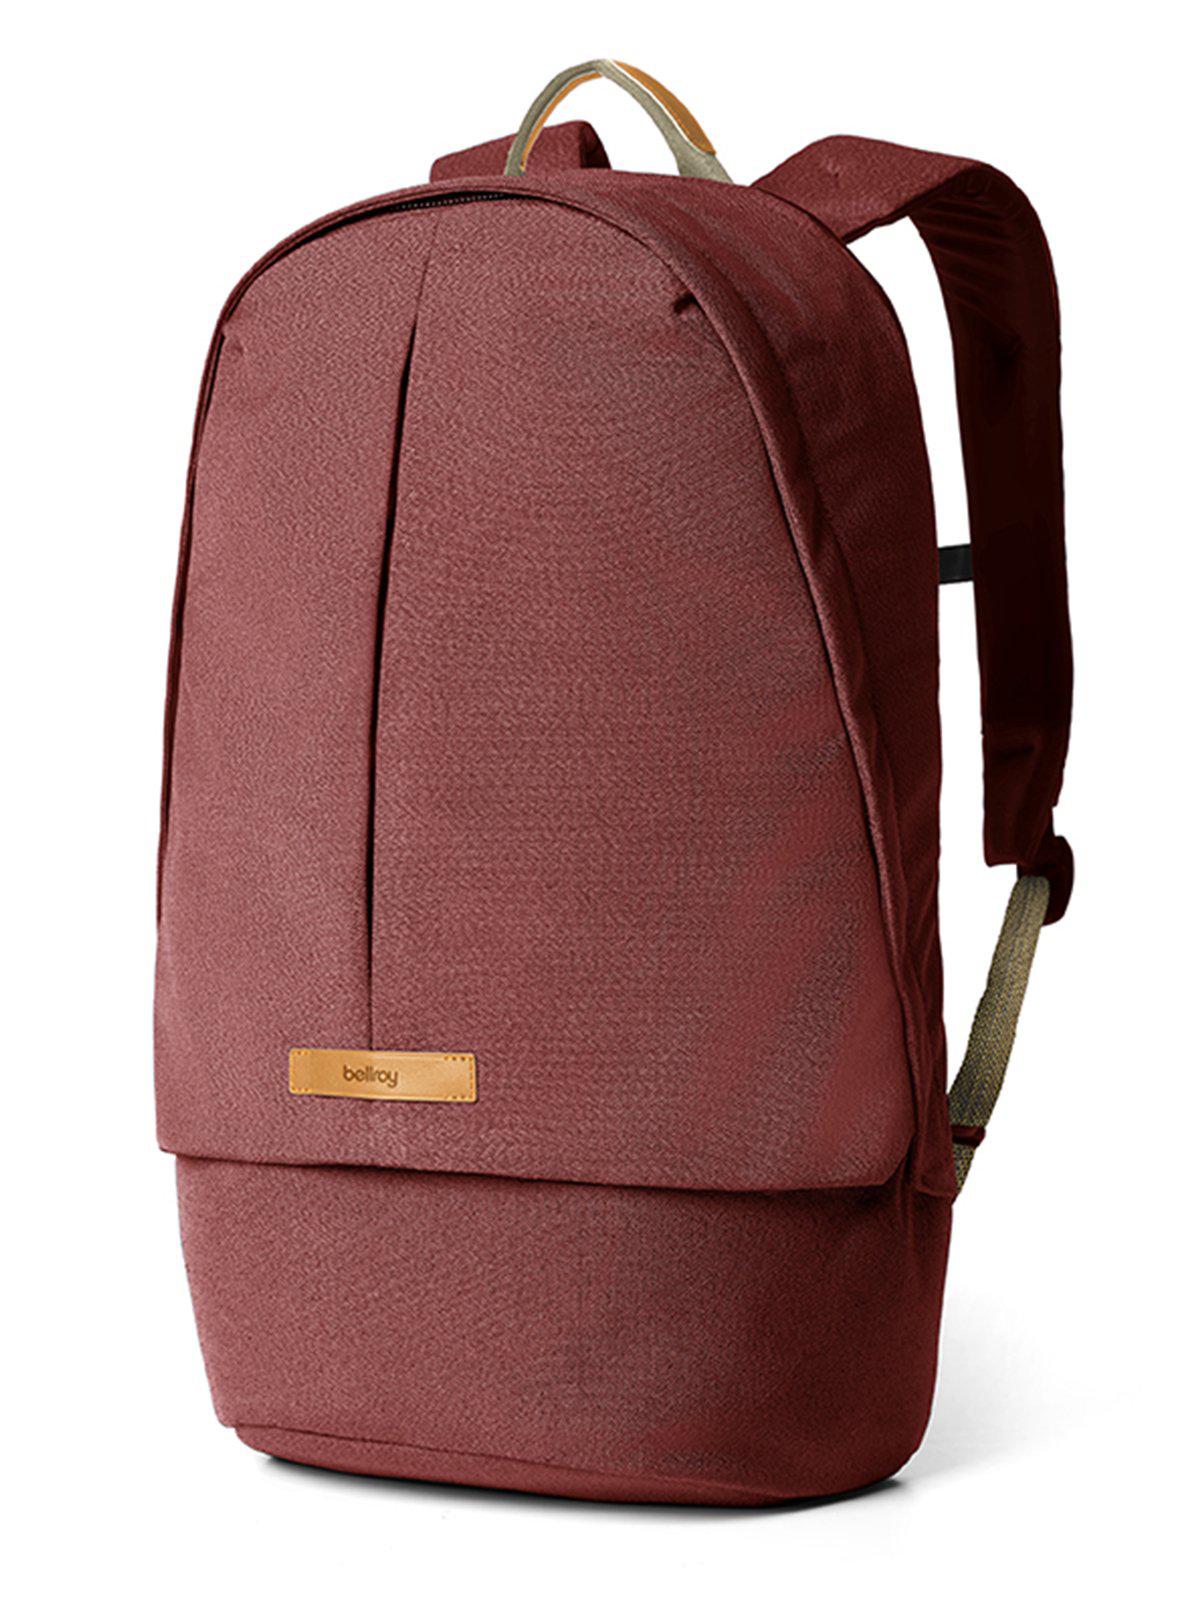 Bellroy Classic Backpack Plus Red Earth